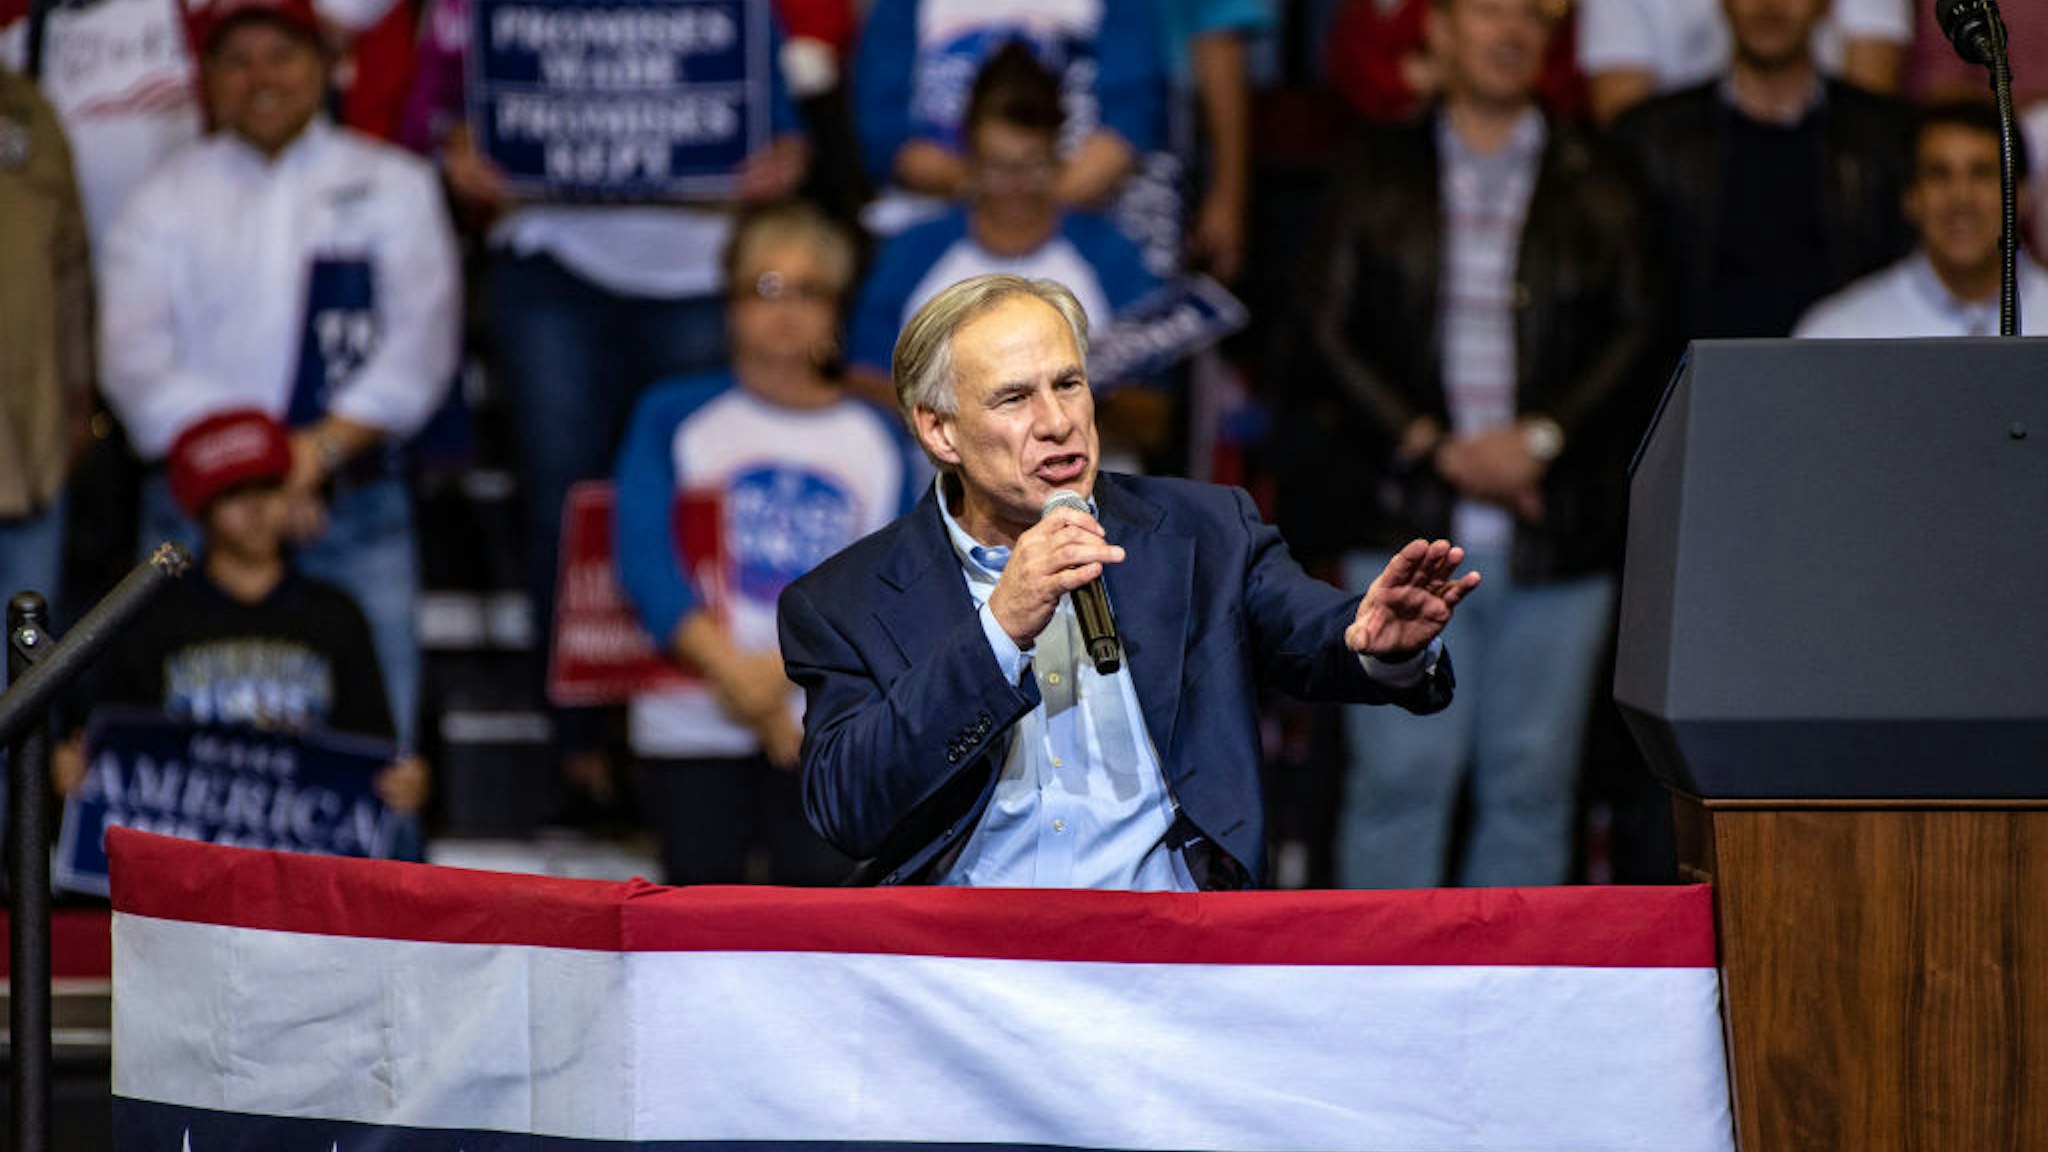 Greg Abbott, governor of Texas, speaks during a campaign rally with U.S. President Donald Trump for Senator Ted Cruz, not pictured, in Houston, Texas, U.S., on Monday, Oct. 22, 2018.